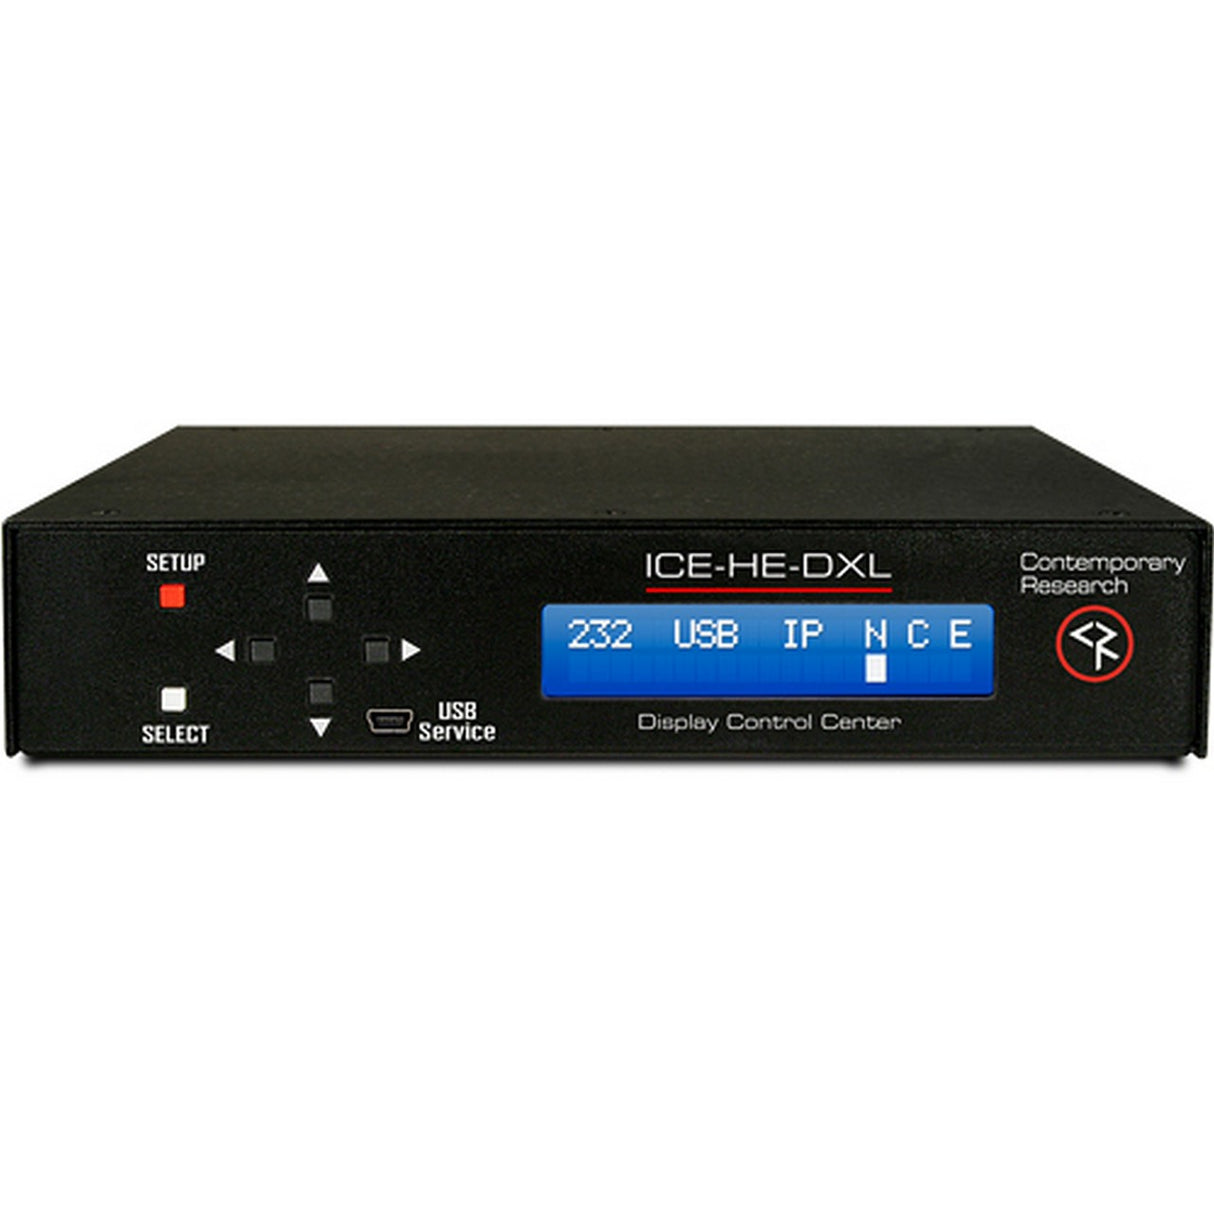 Contemporary Research ICE-HE-DXL | Display Control Center